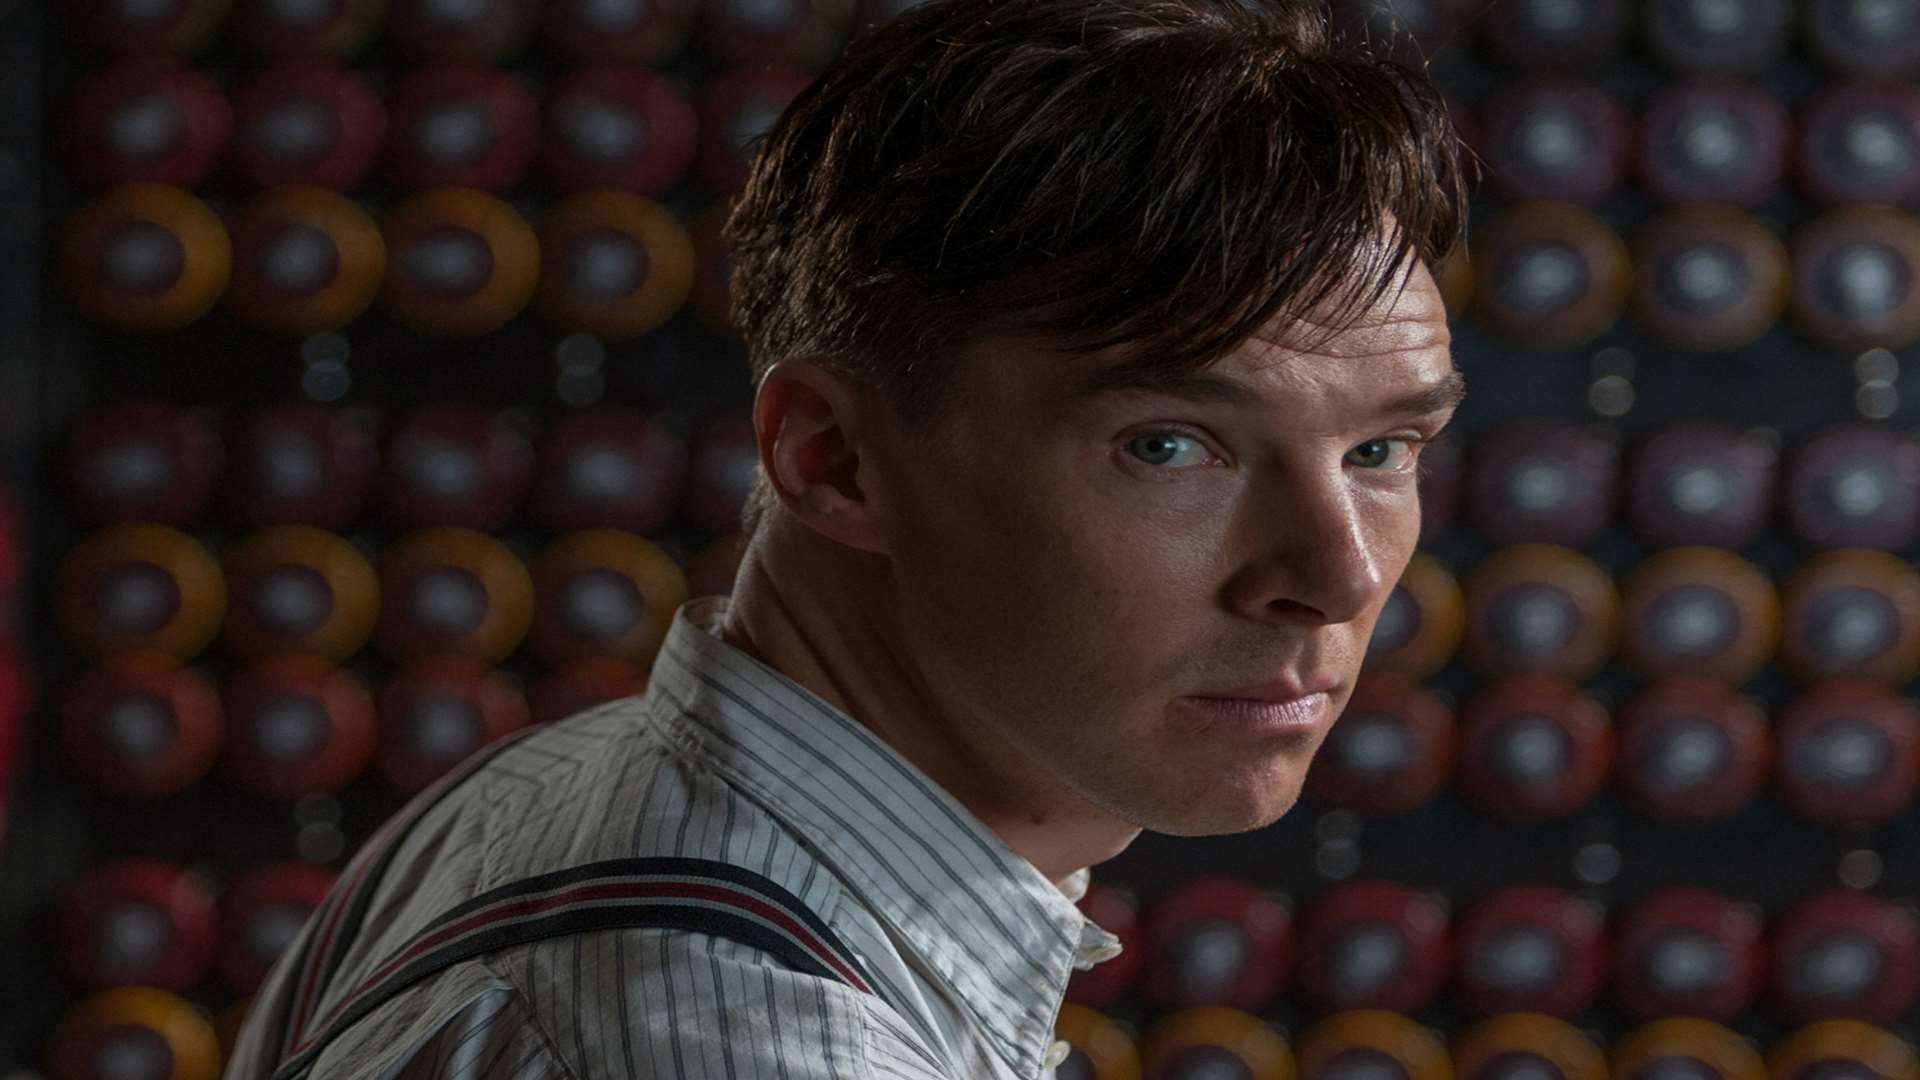 Benedict Cumberbatch in his Oscar-nominated role as Alan Turing in the Imitation Game